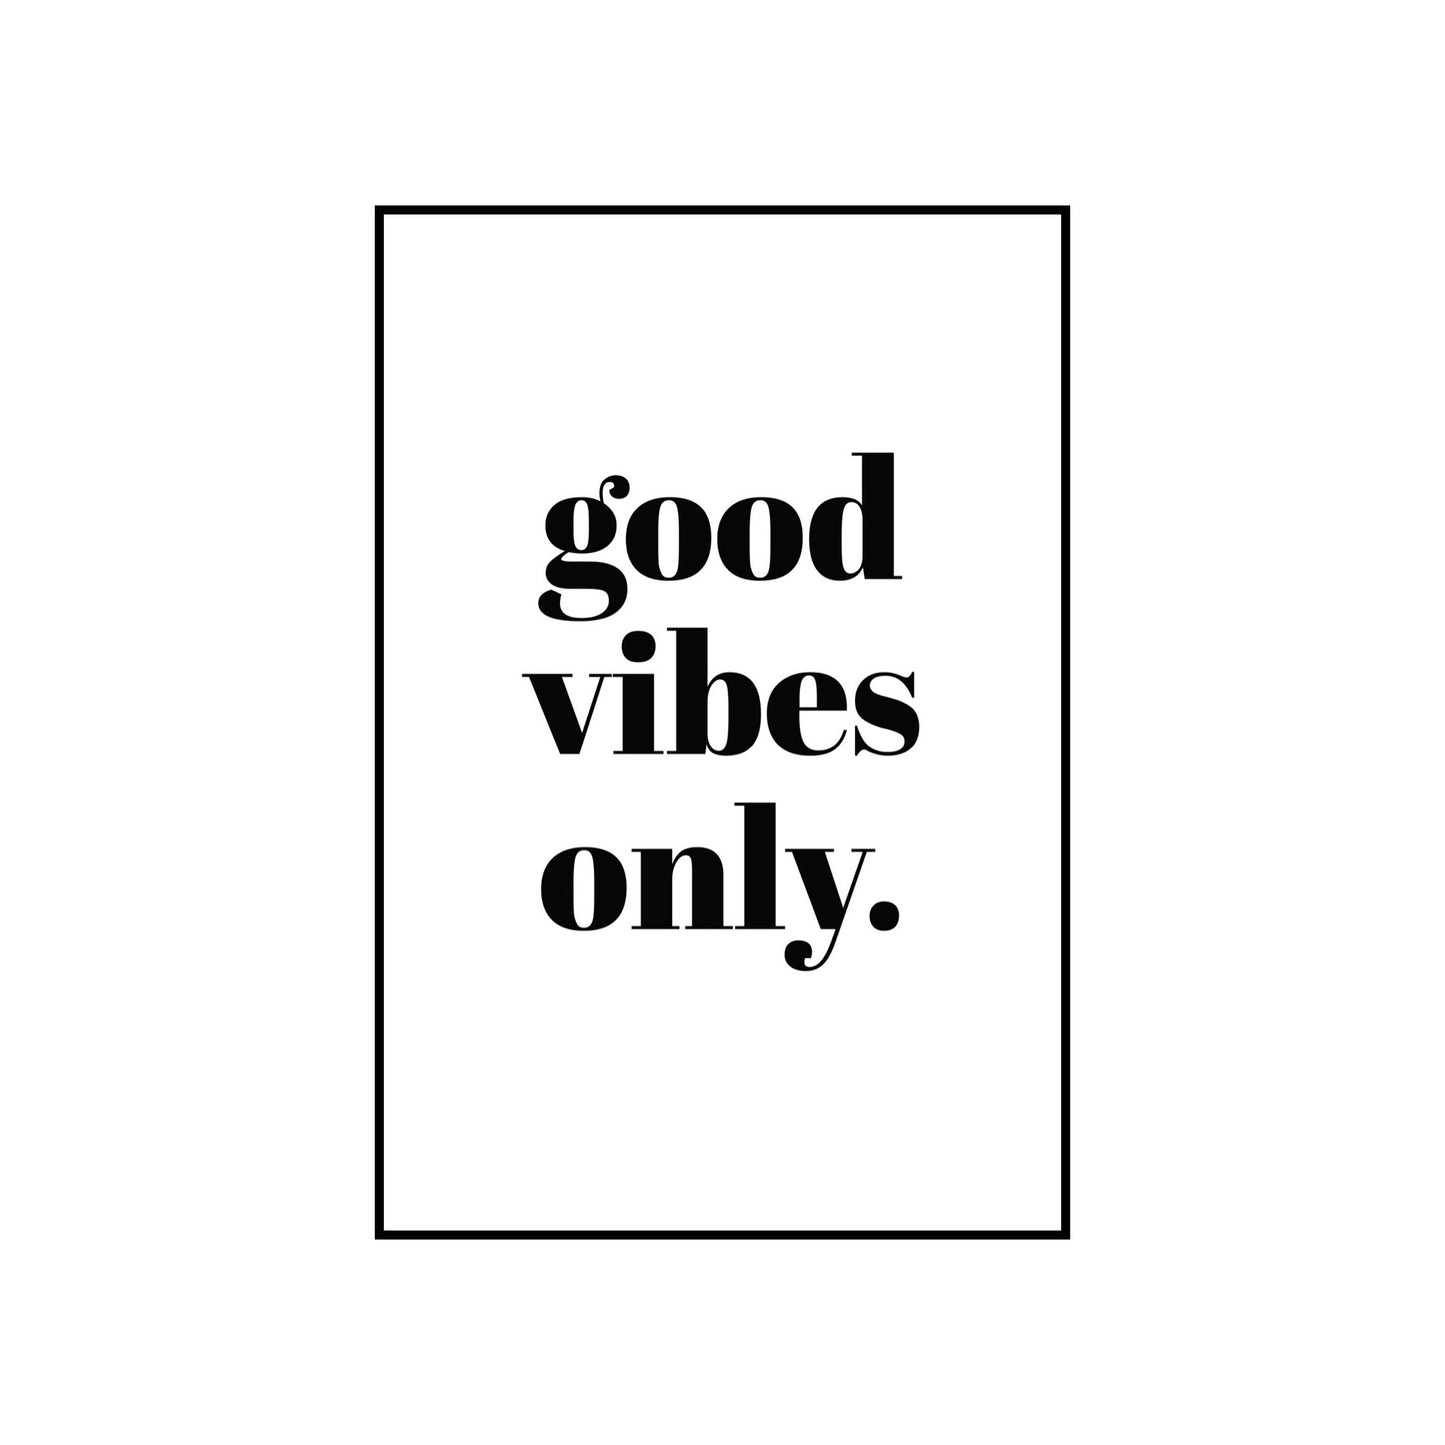 Good vibes only - THE WALL STYLIST